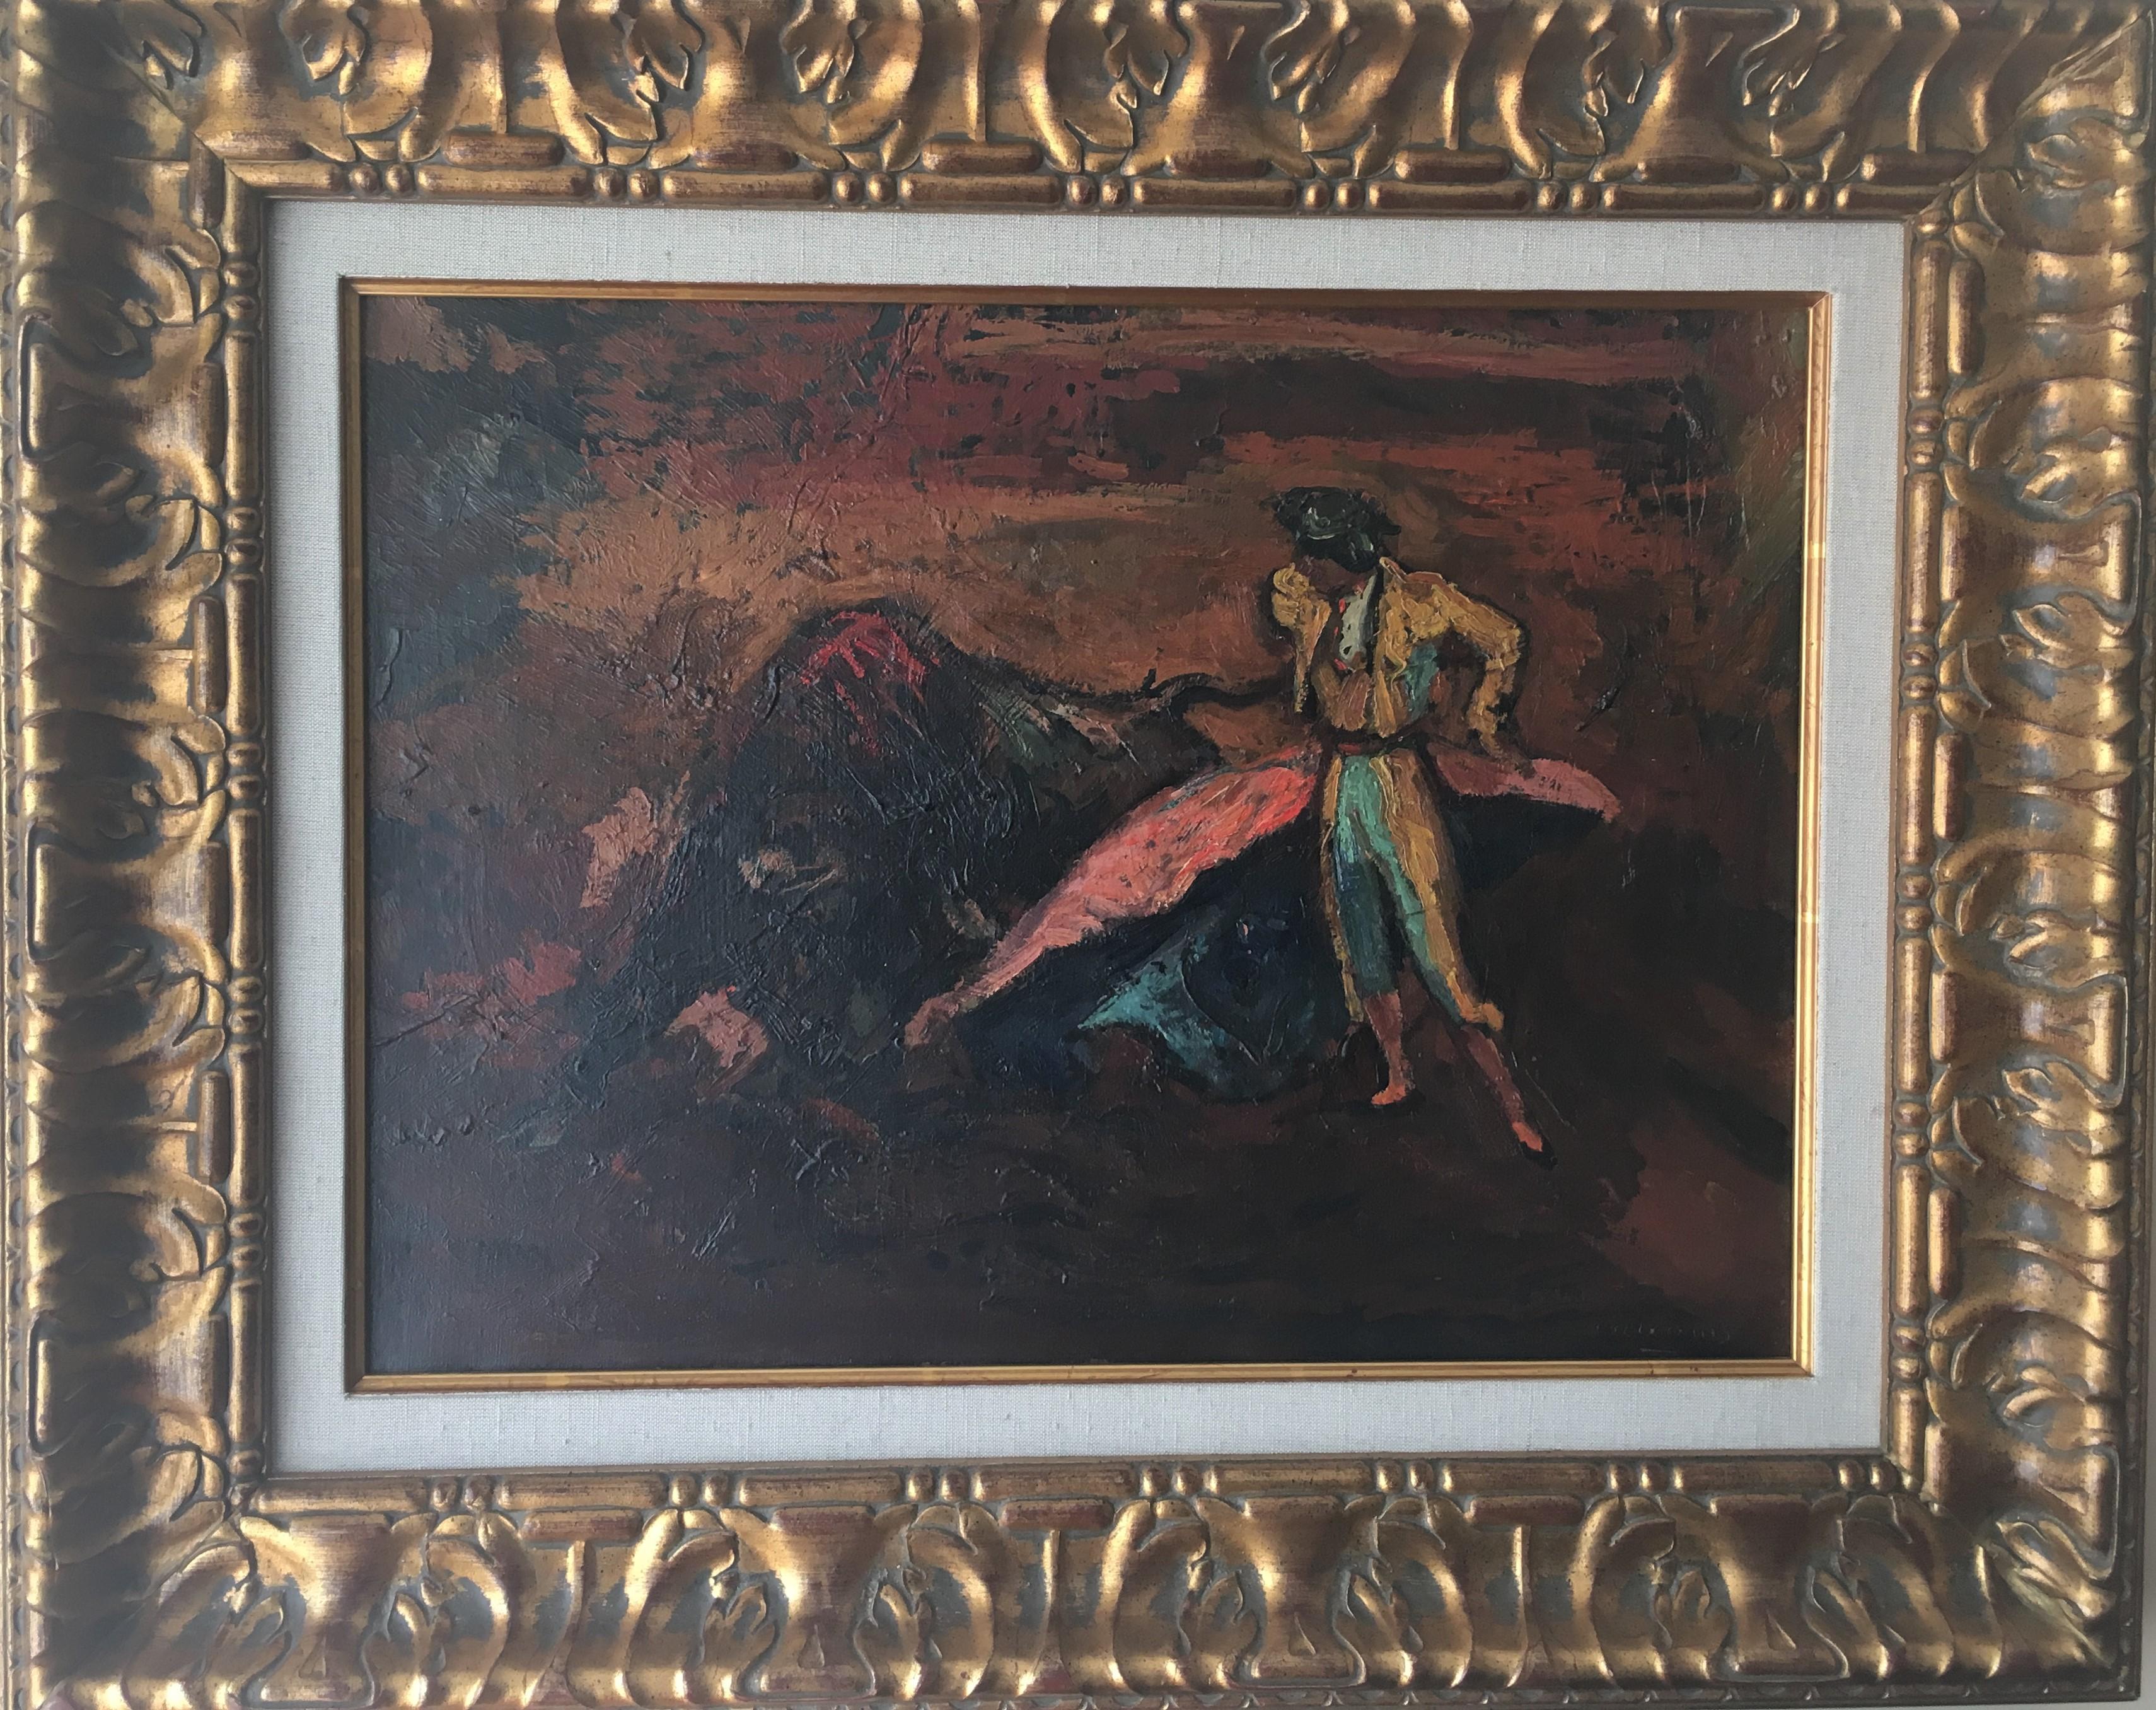 Pere Créixams Picó Figurative Painting - Creixams  14 Bullfighter and Bull original impressionist acrylic canvas painting